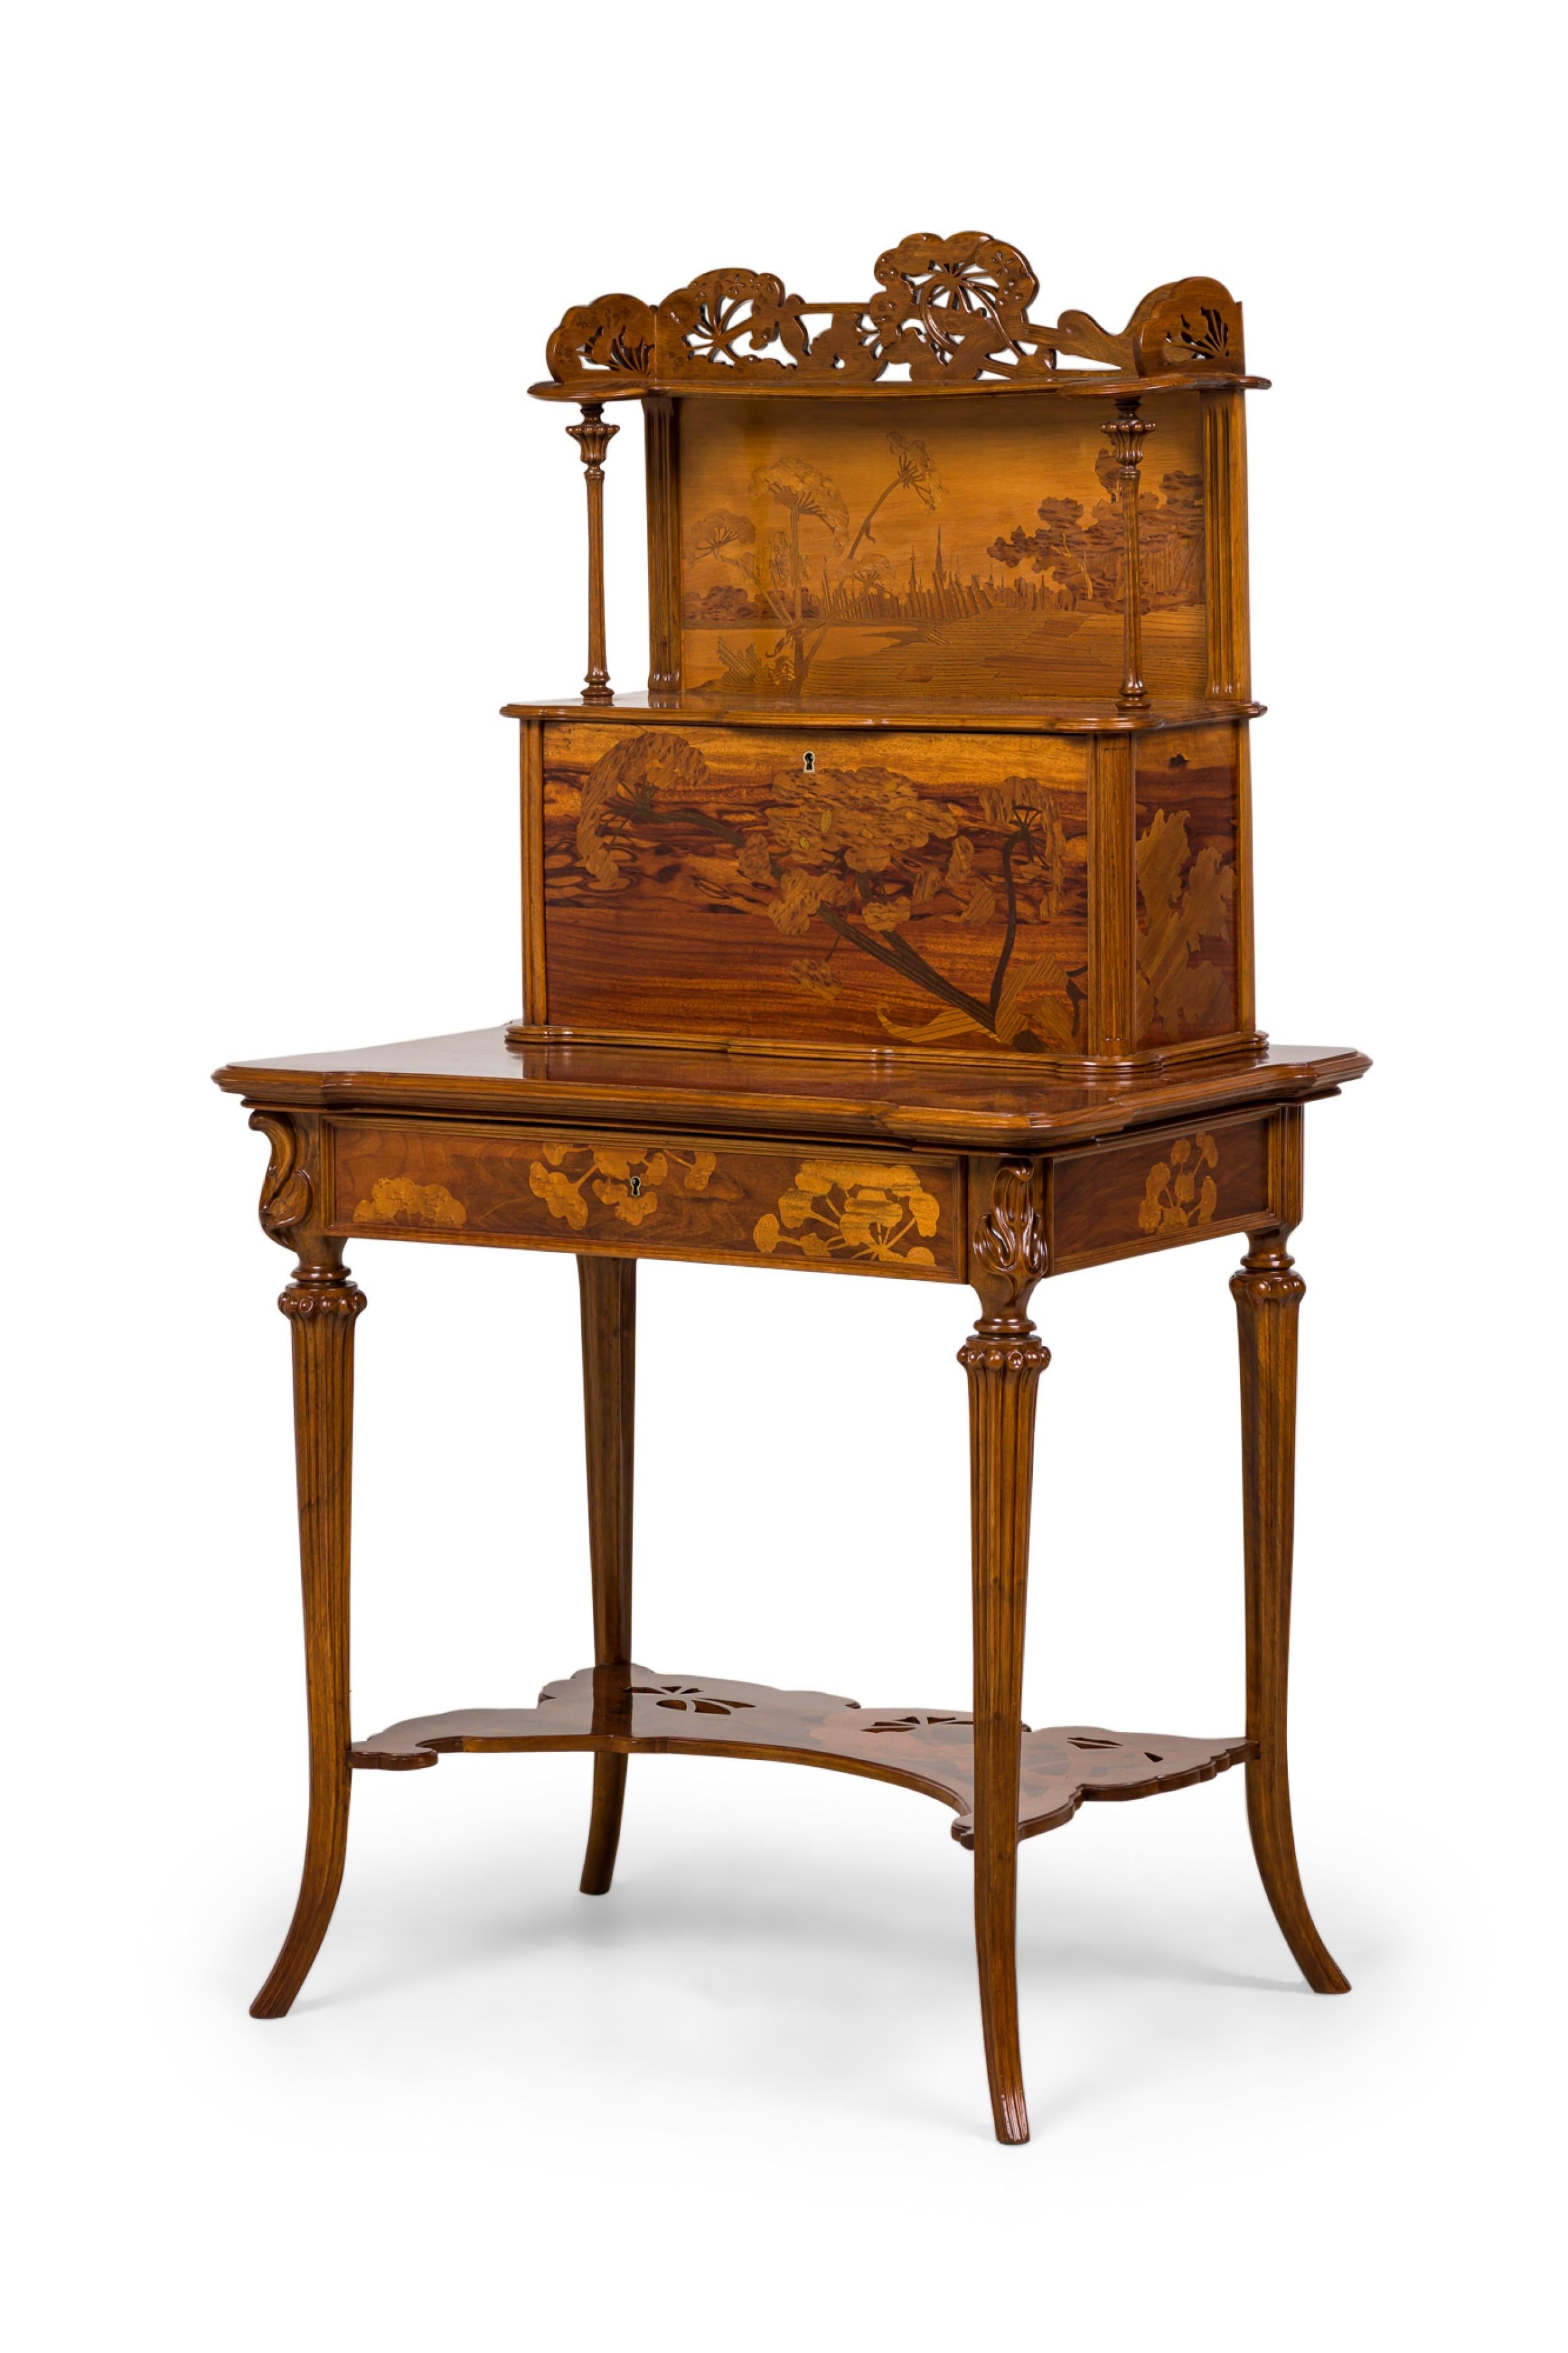 French Art Nouveau writing desk featuring an open upper section with a marquetry inlaid pasteral scene back panel under a carved floral crest supported by two fluted & carved columns over a drop front cabinet having a floral marquetry cabinet